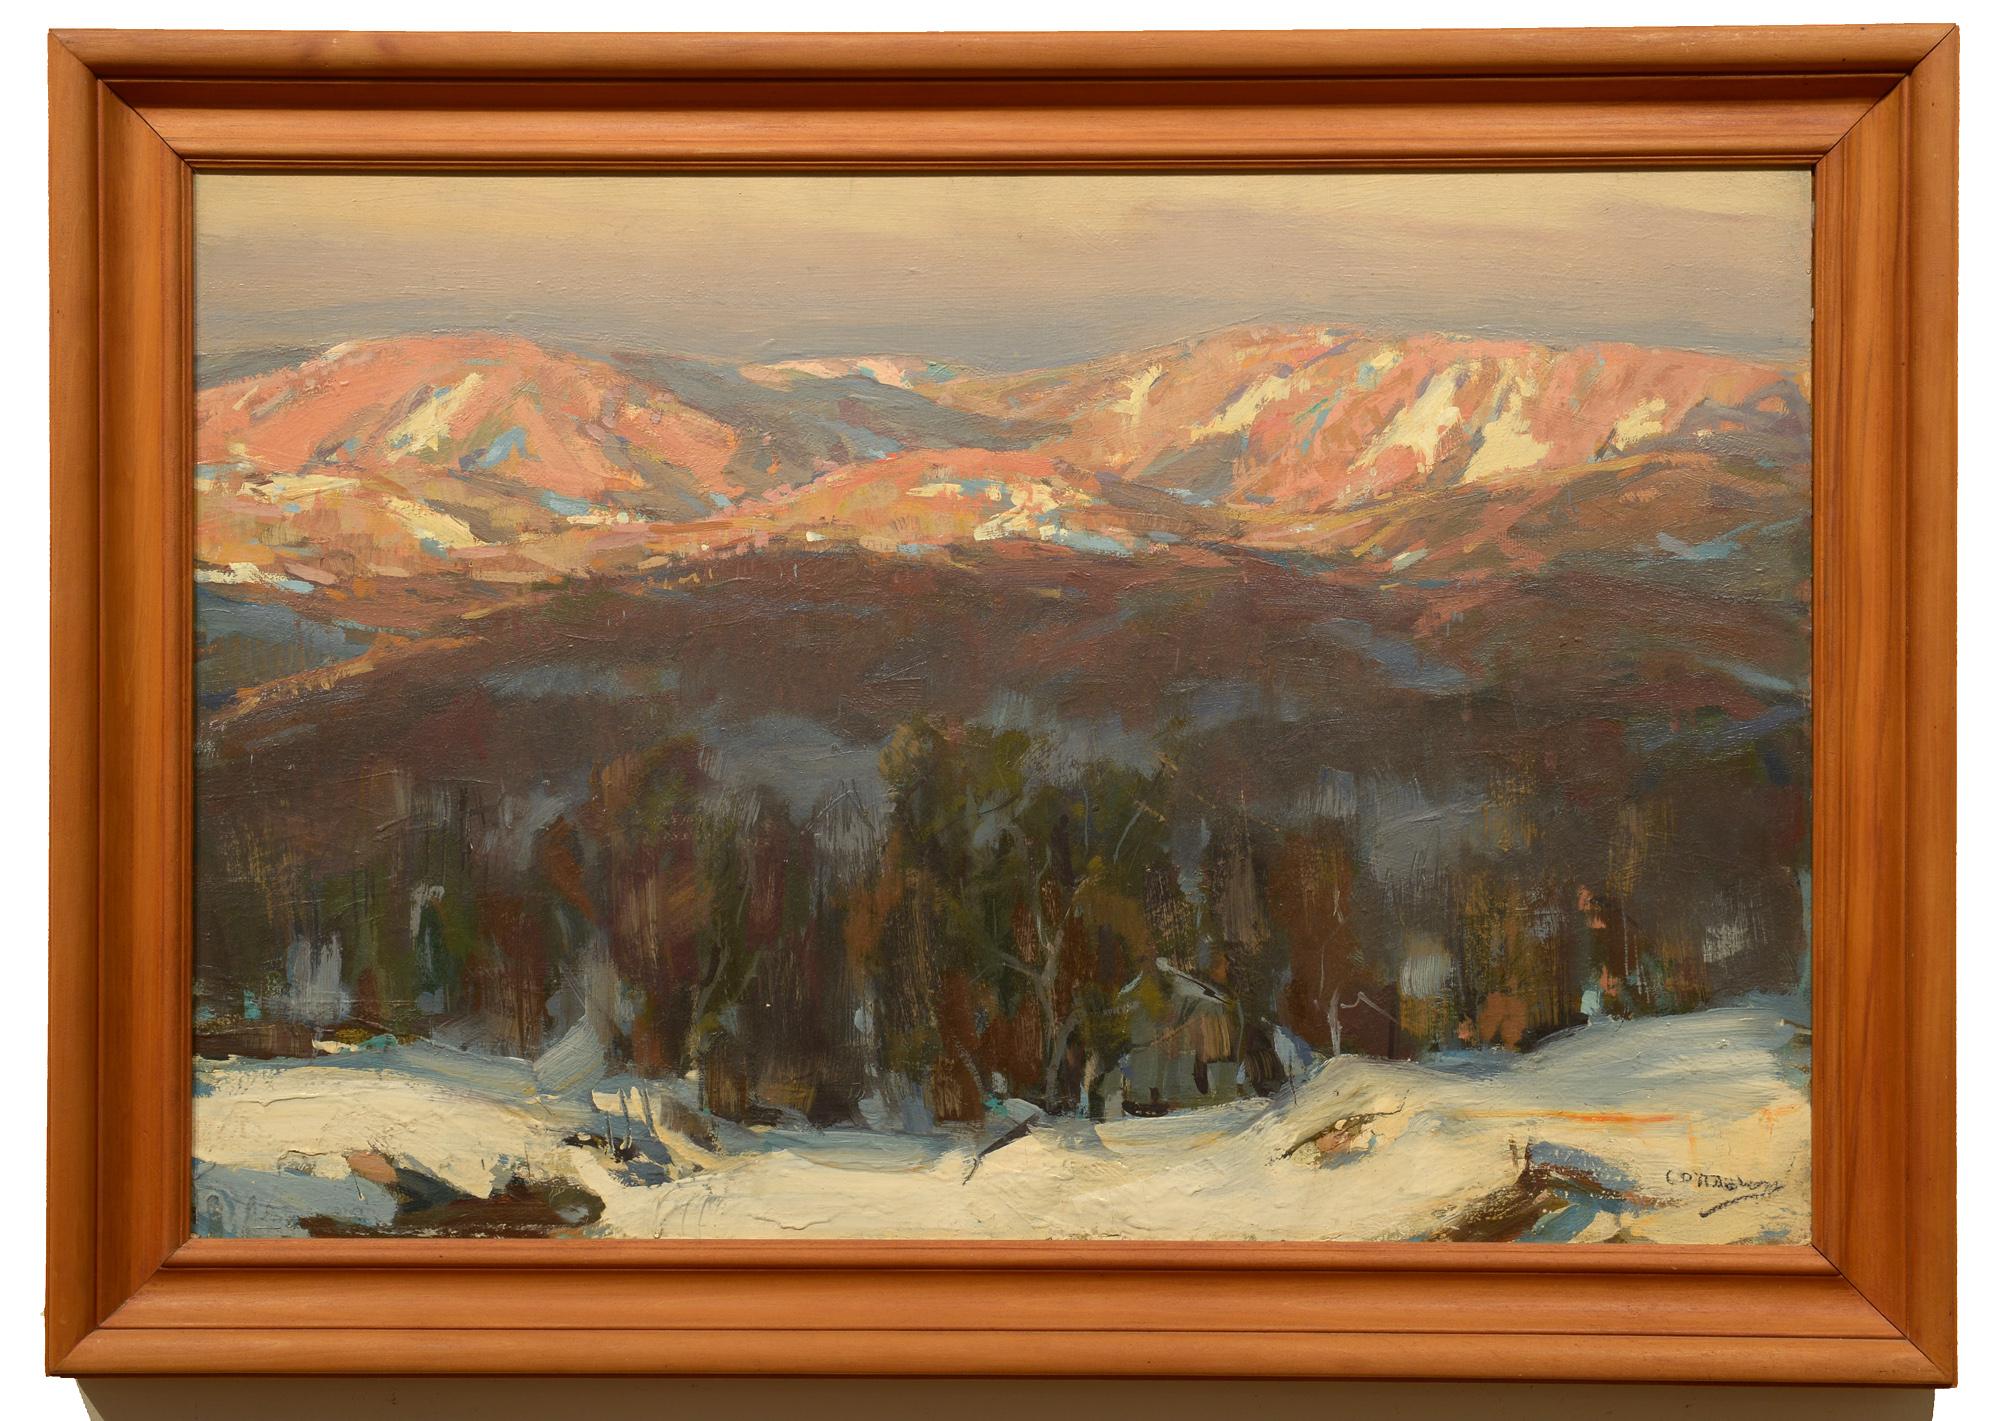 Vermont Mountains - Painting by Jay Hall Connaway